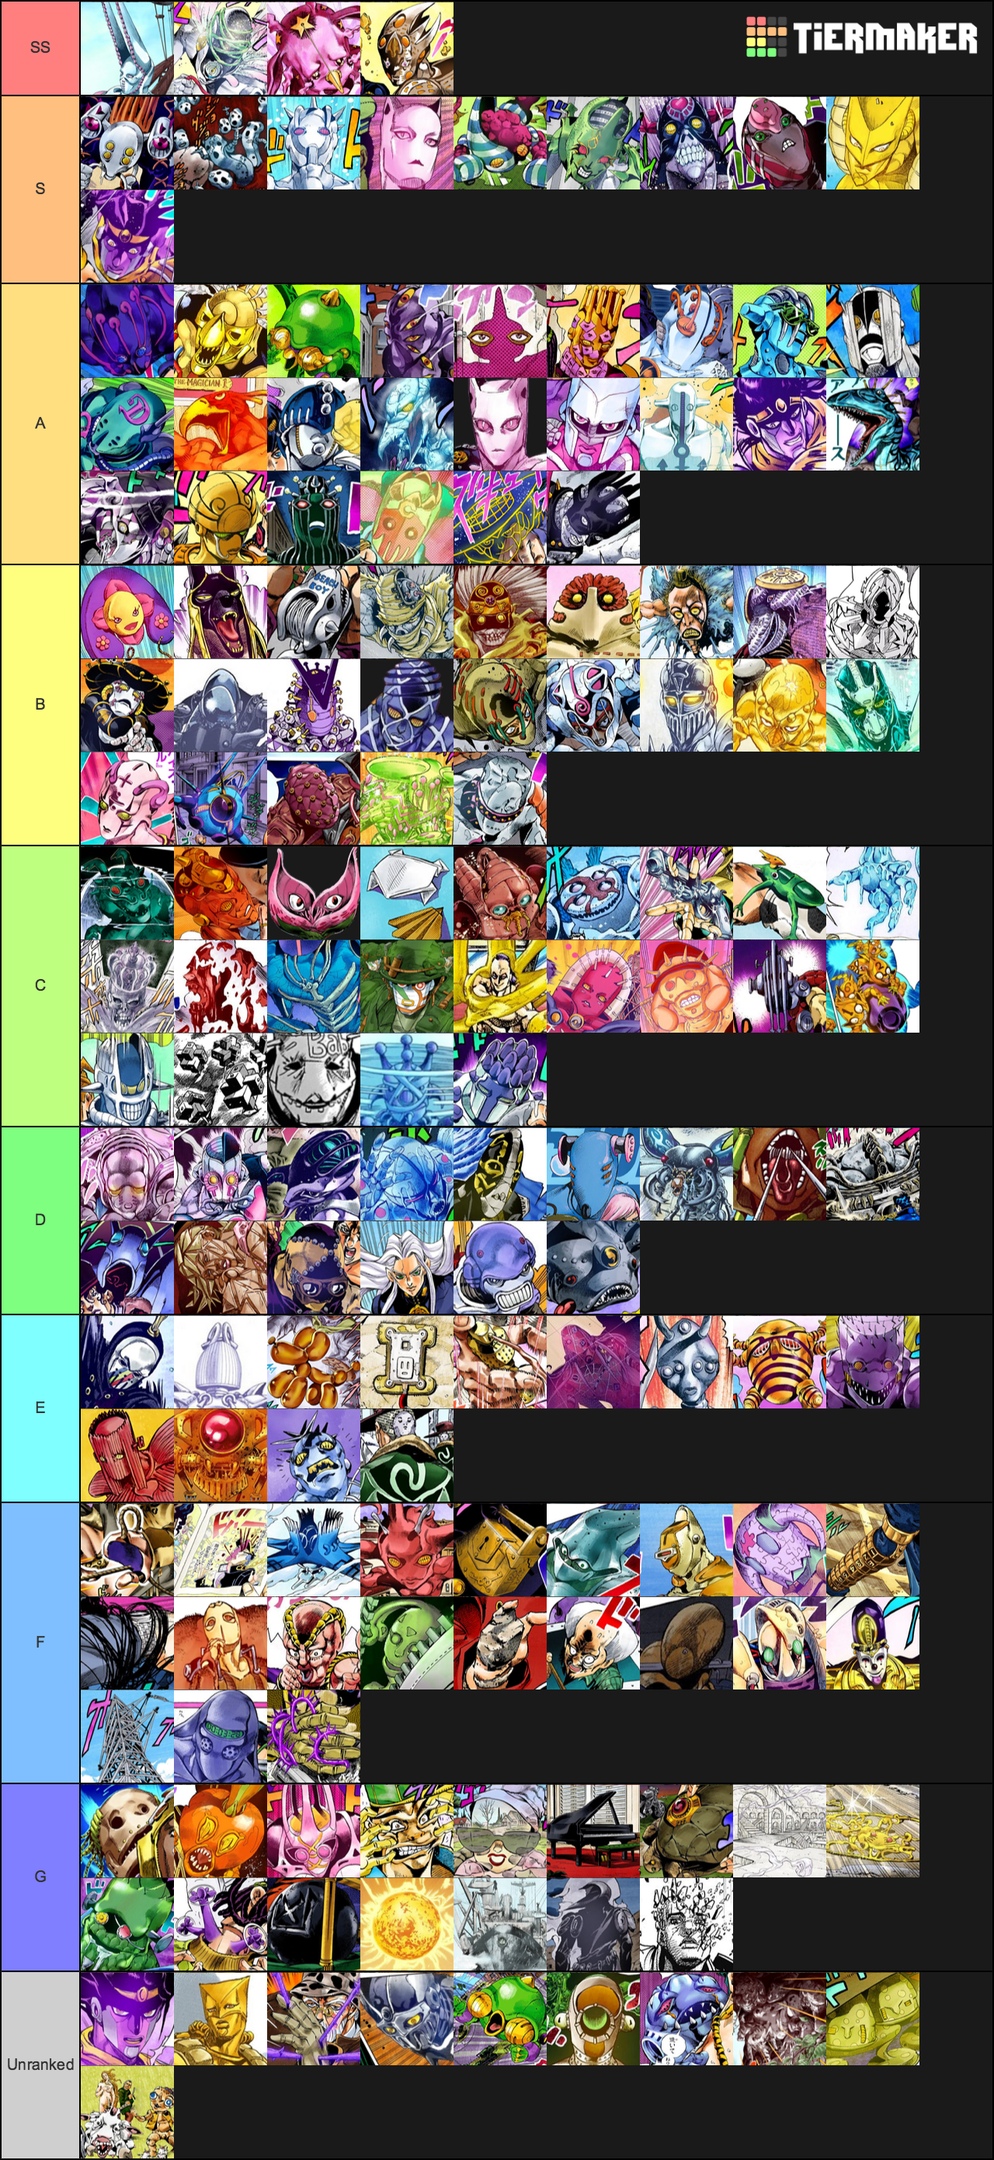 How to make a stand tier list